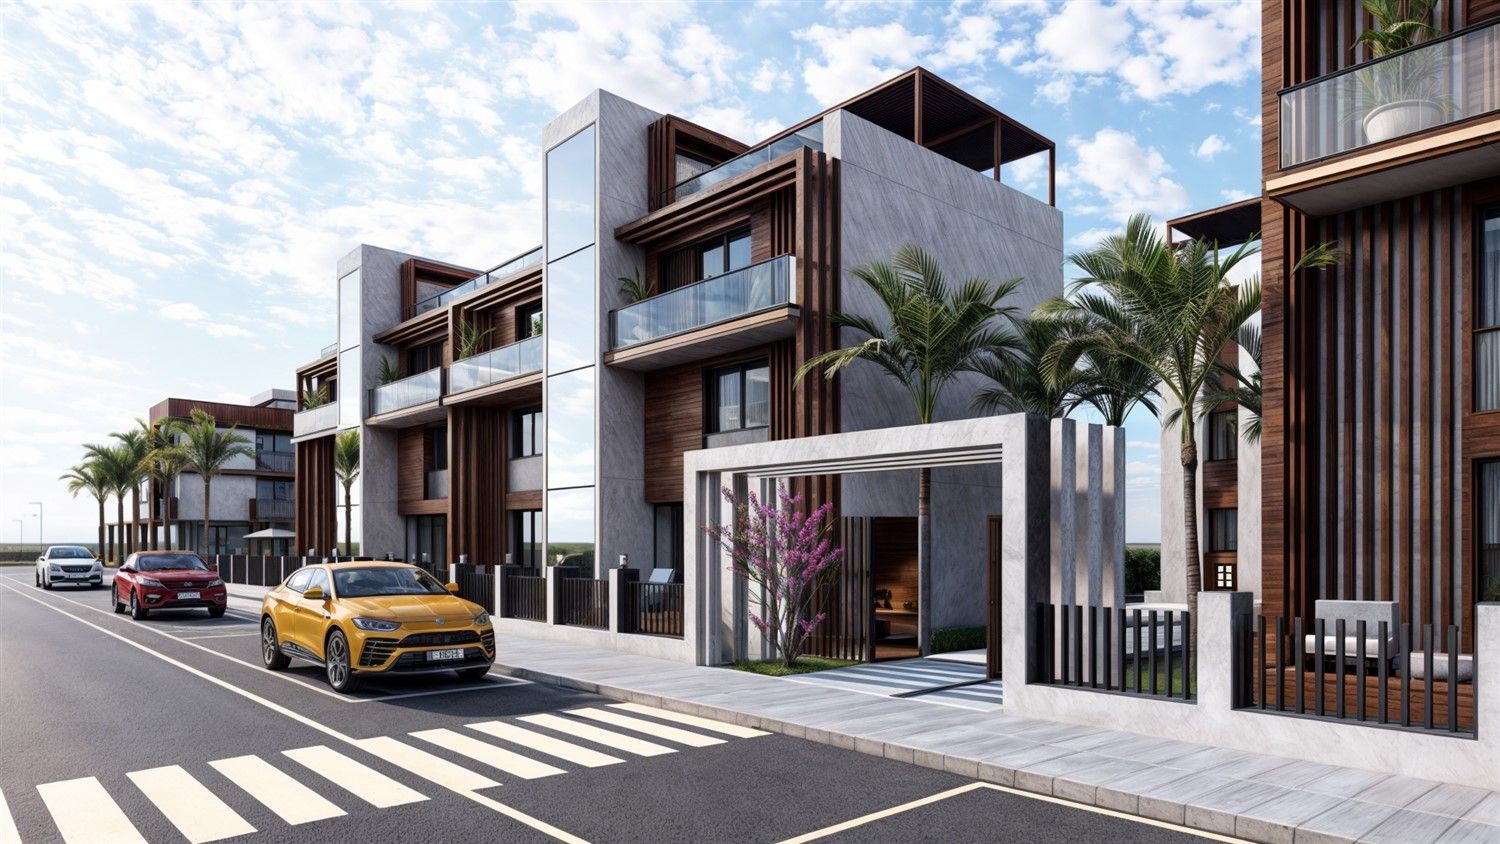 New twin villas in a cozy residential complex